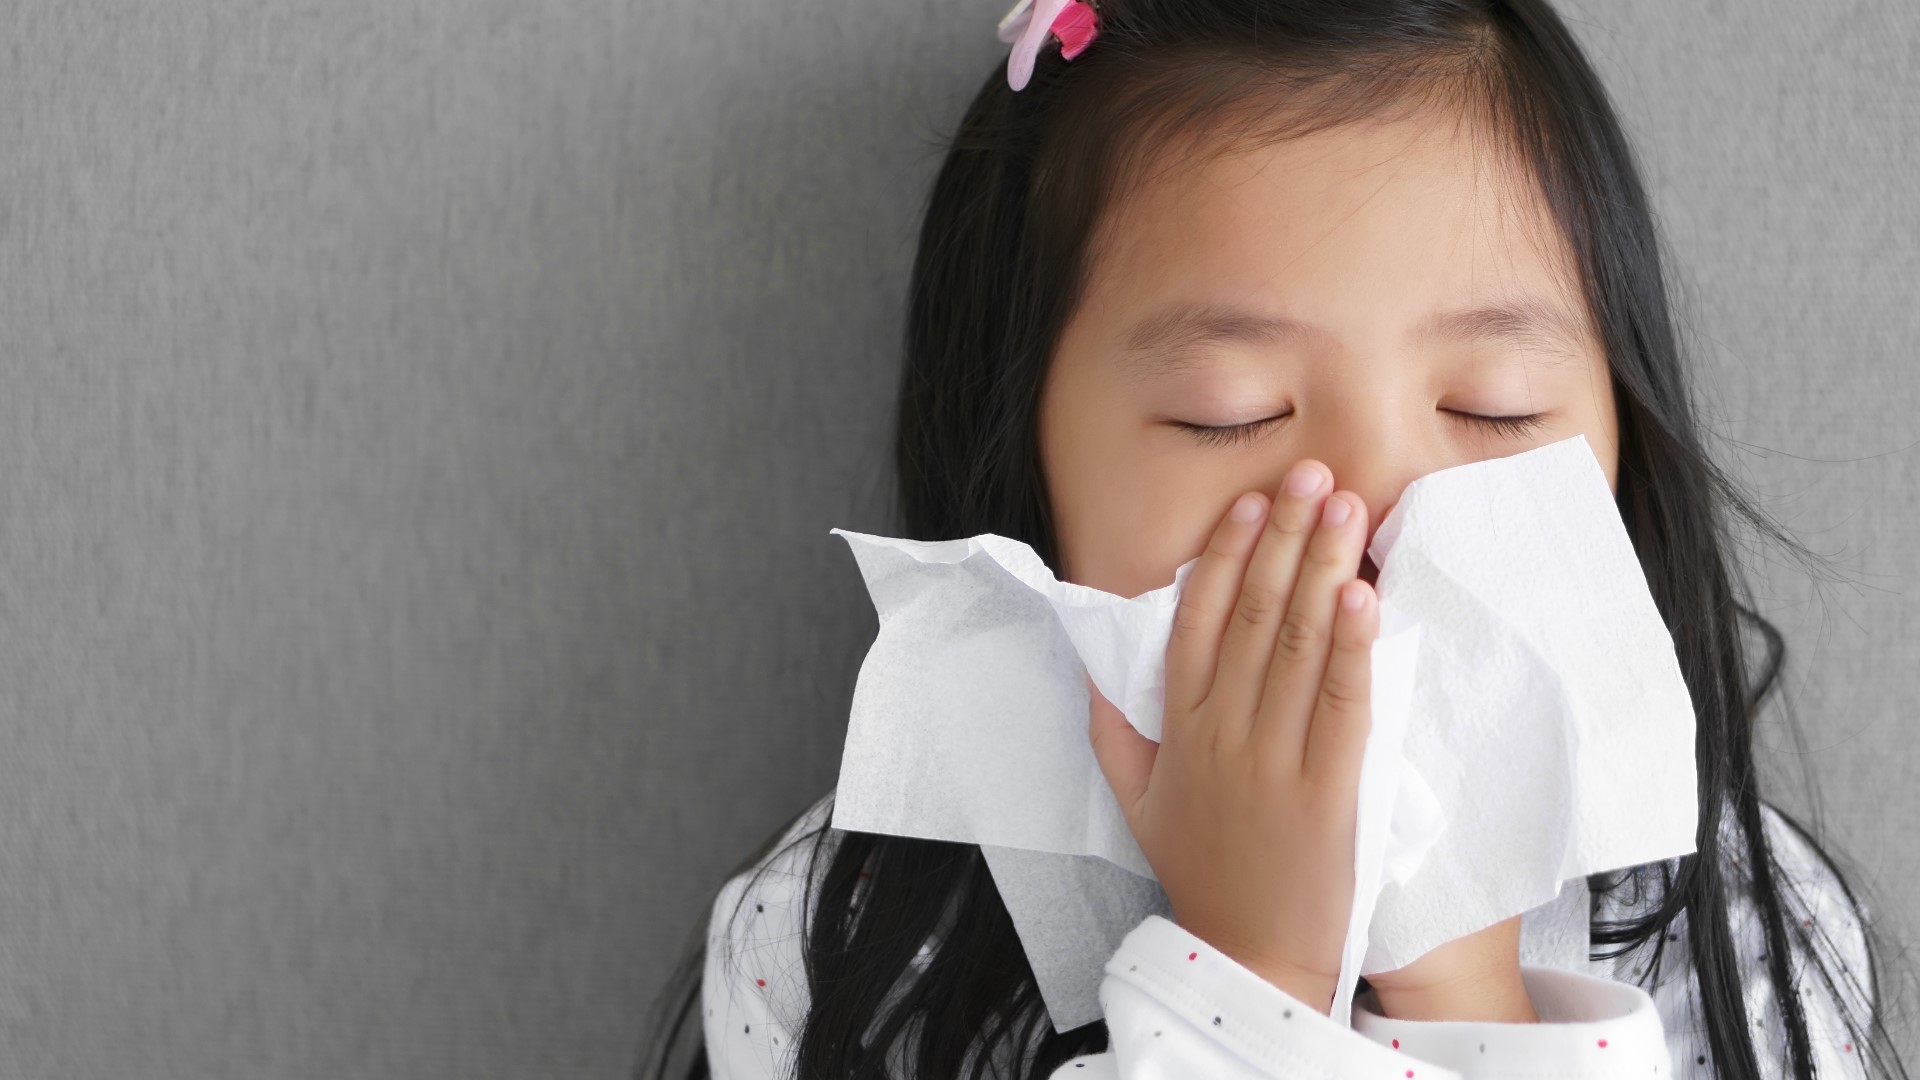 Dr. Vinitha Moopen with WellSpan Health has some tips on how to make allergy season more bearable.